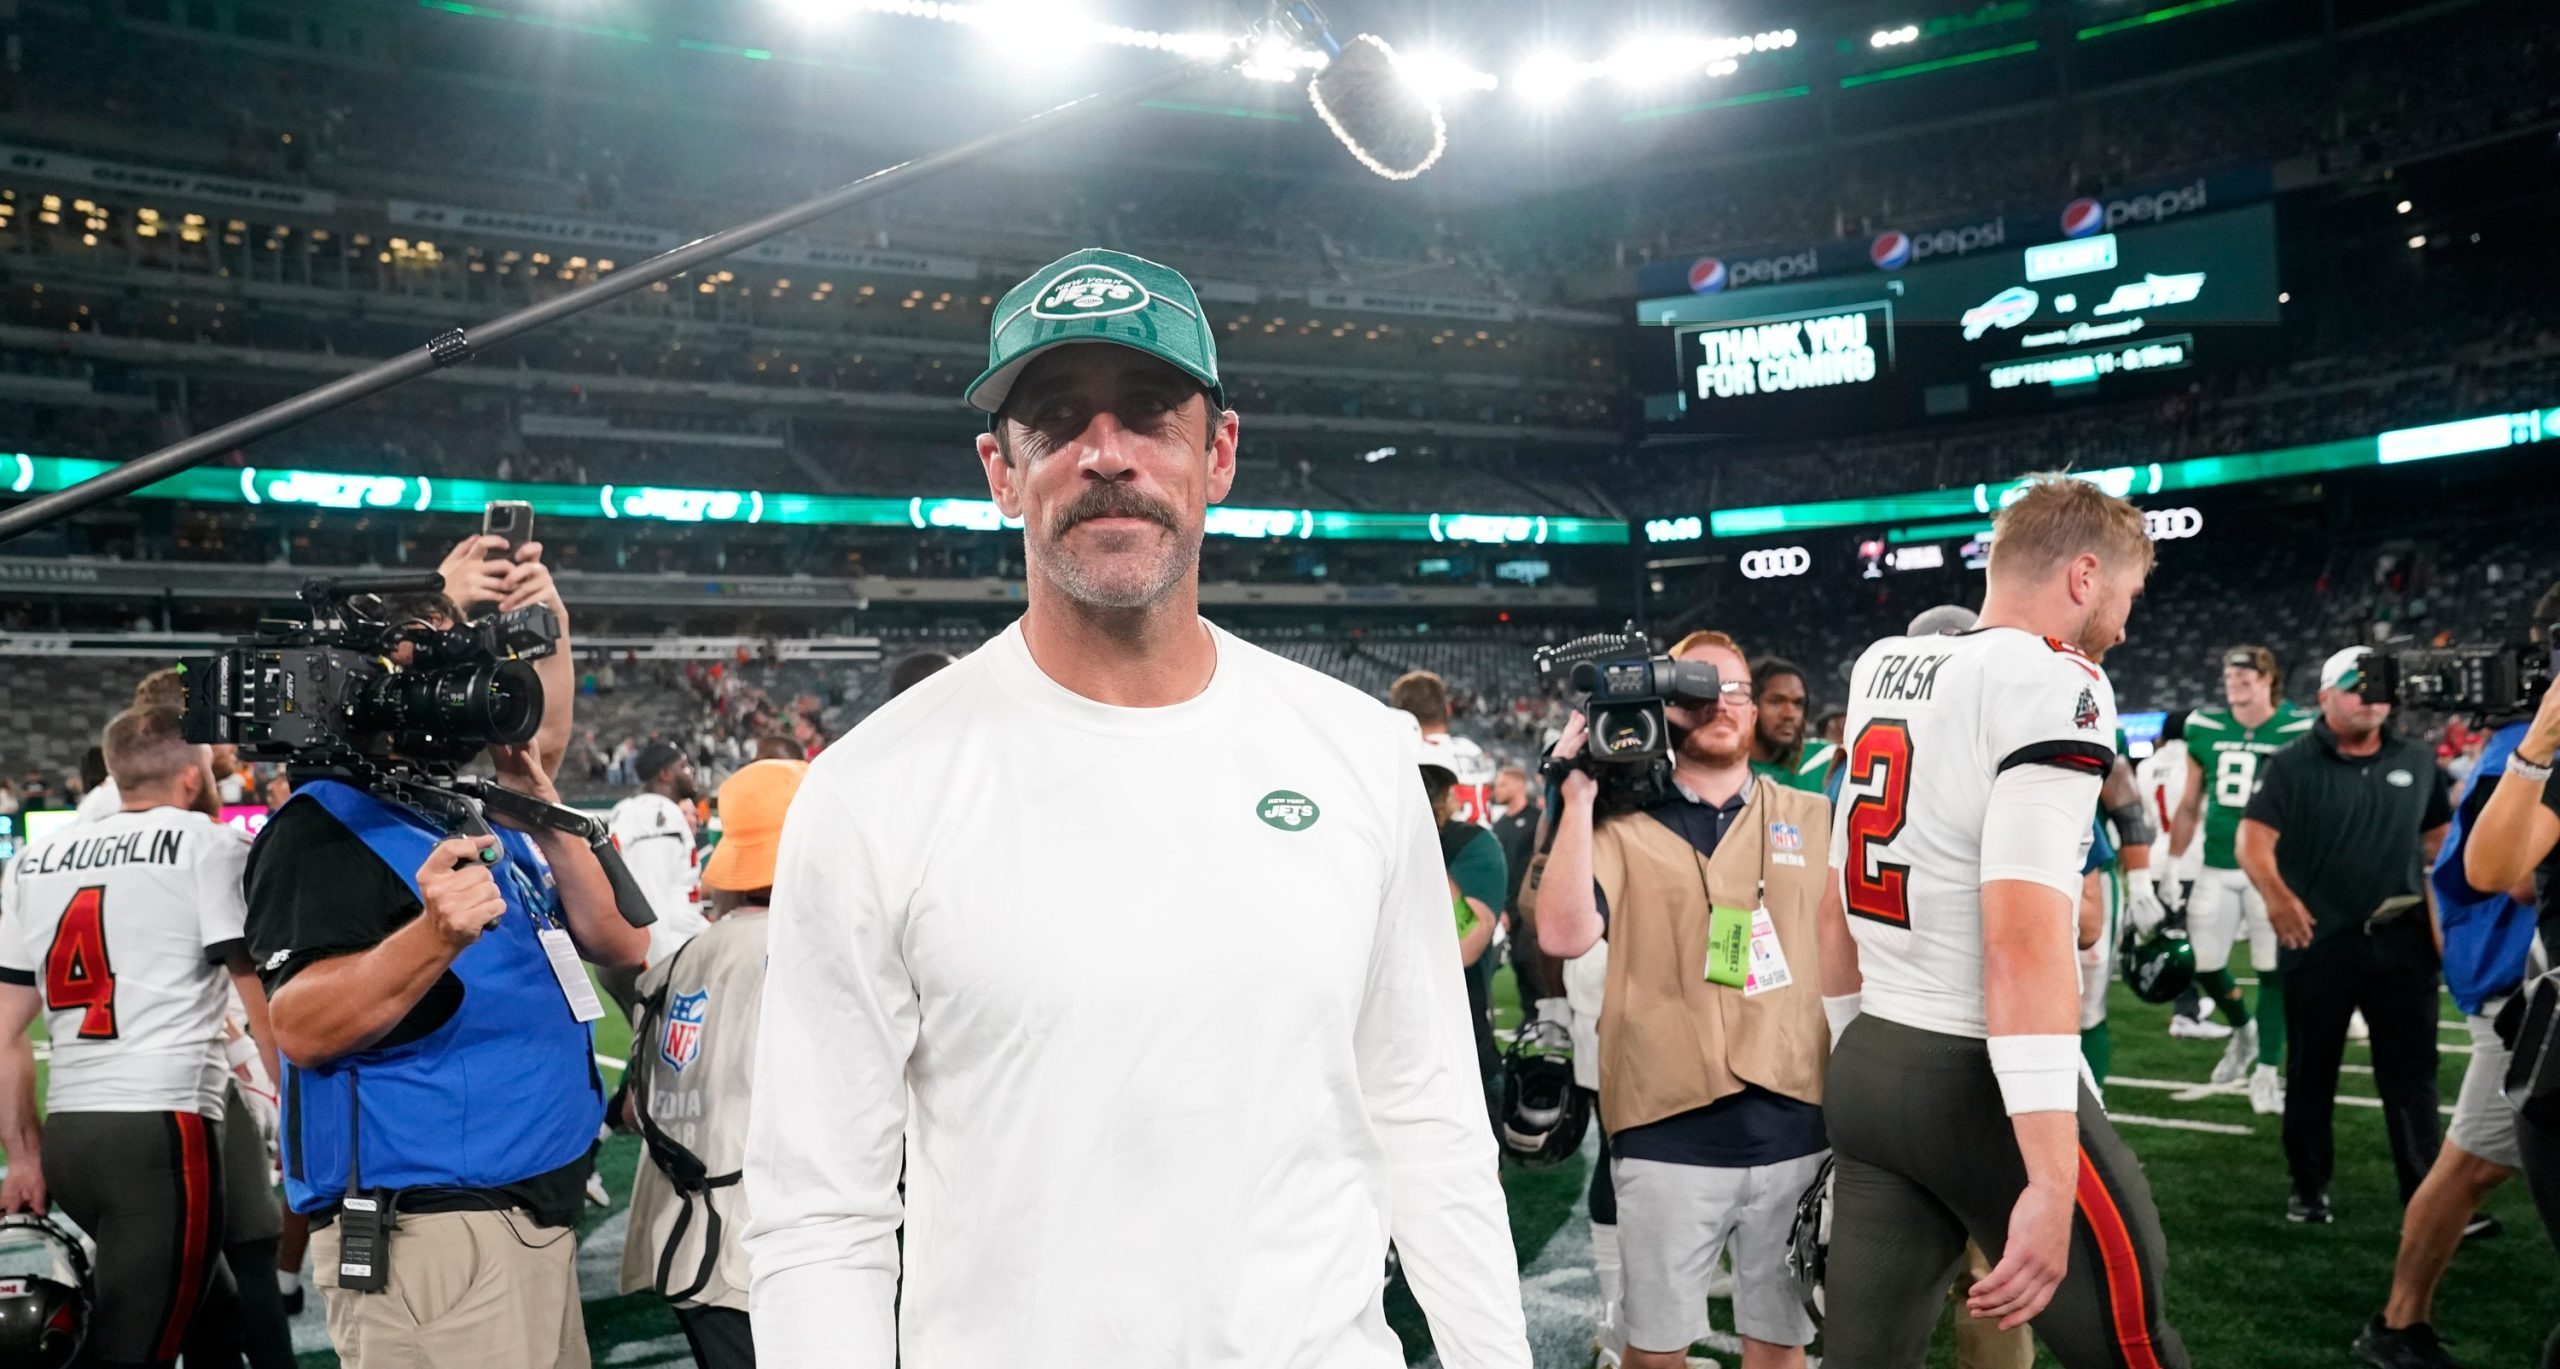 New York Jets quarterback Aaron Rodgers after the game. The Buccaneers defeat the Jets, 13-6, in a preseason NFL game at MetLife Stadium on Saturday, Aug. 19, 2023, in East Rutherford.